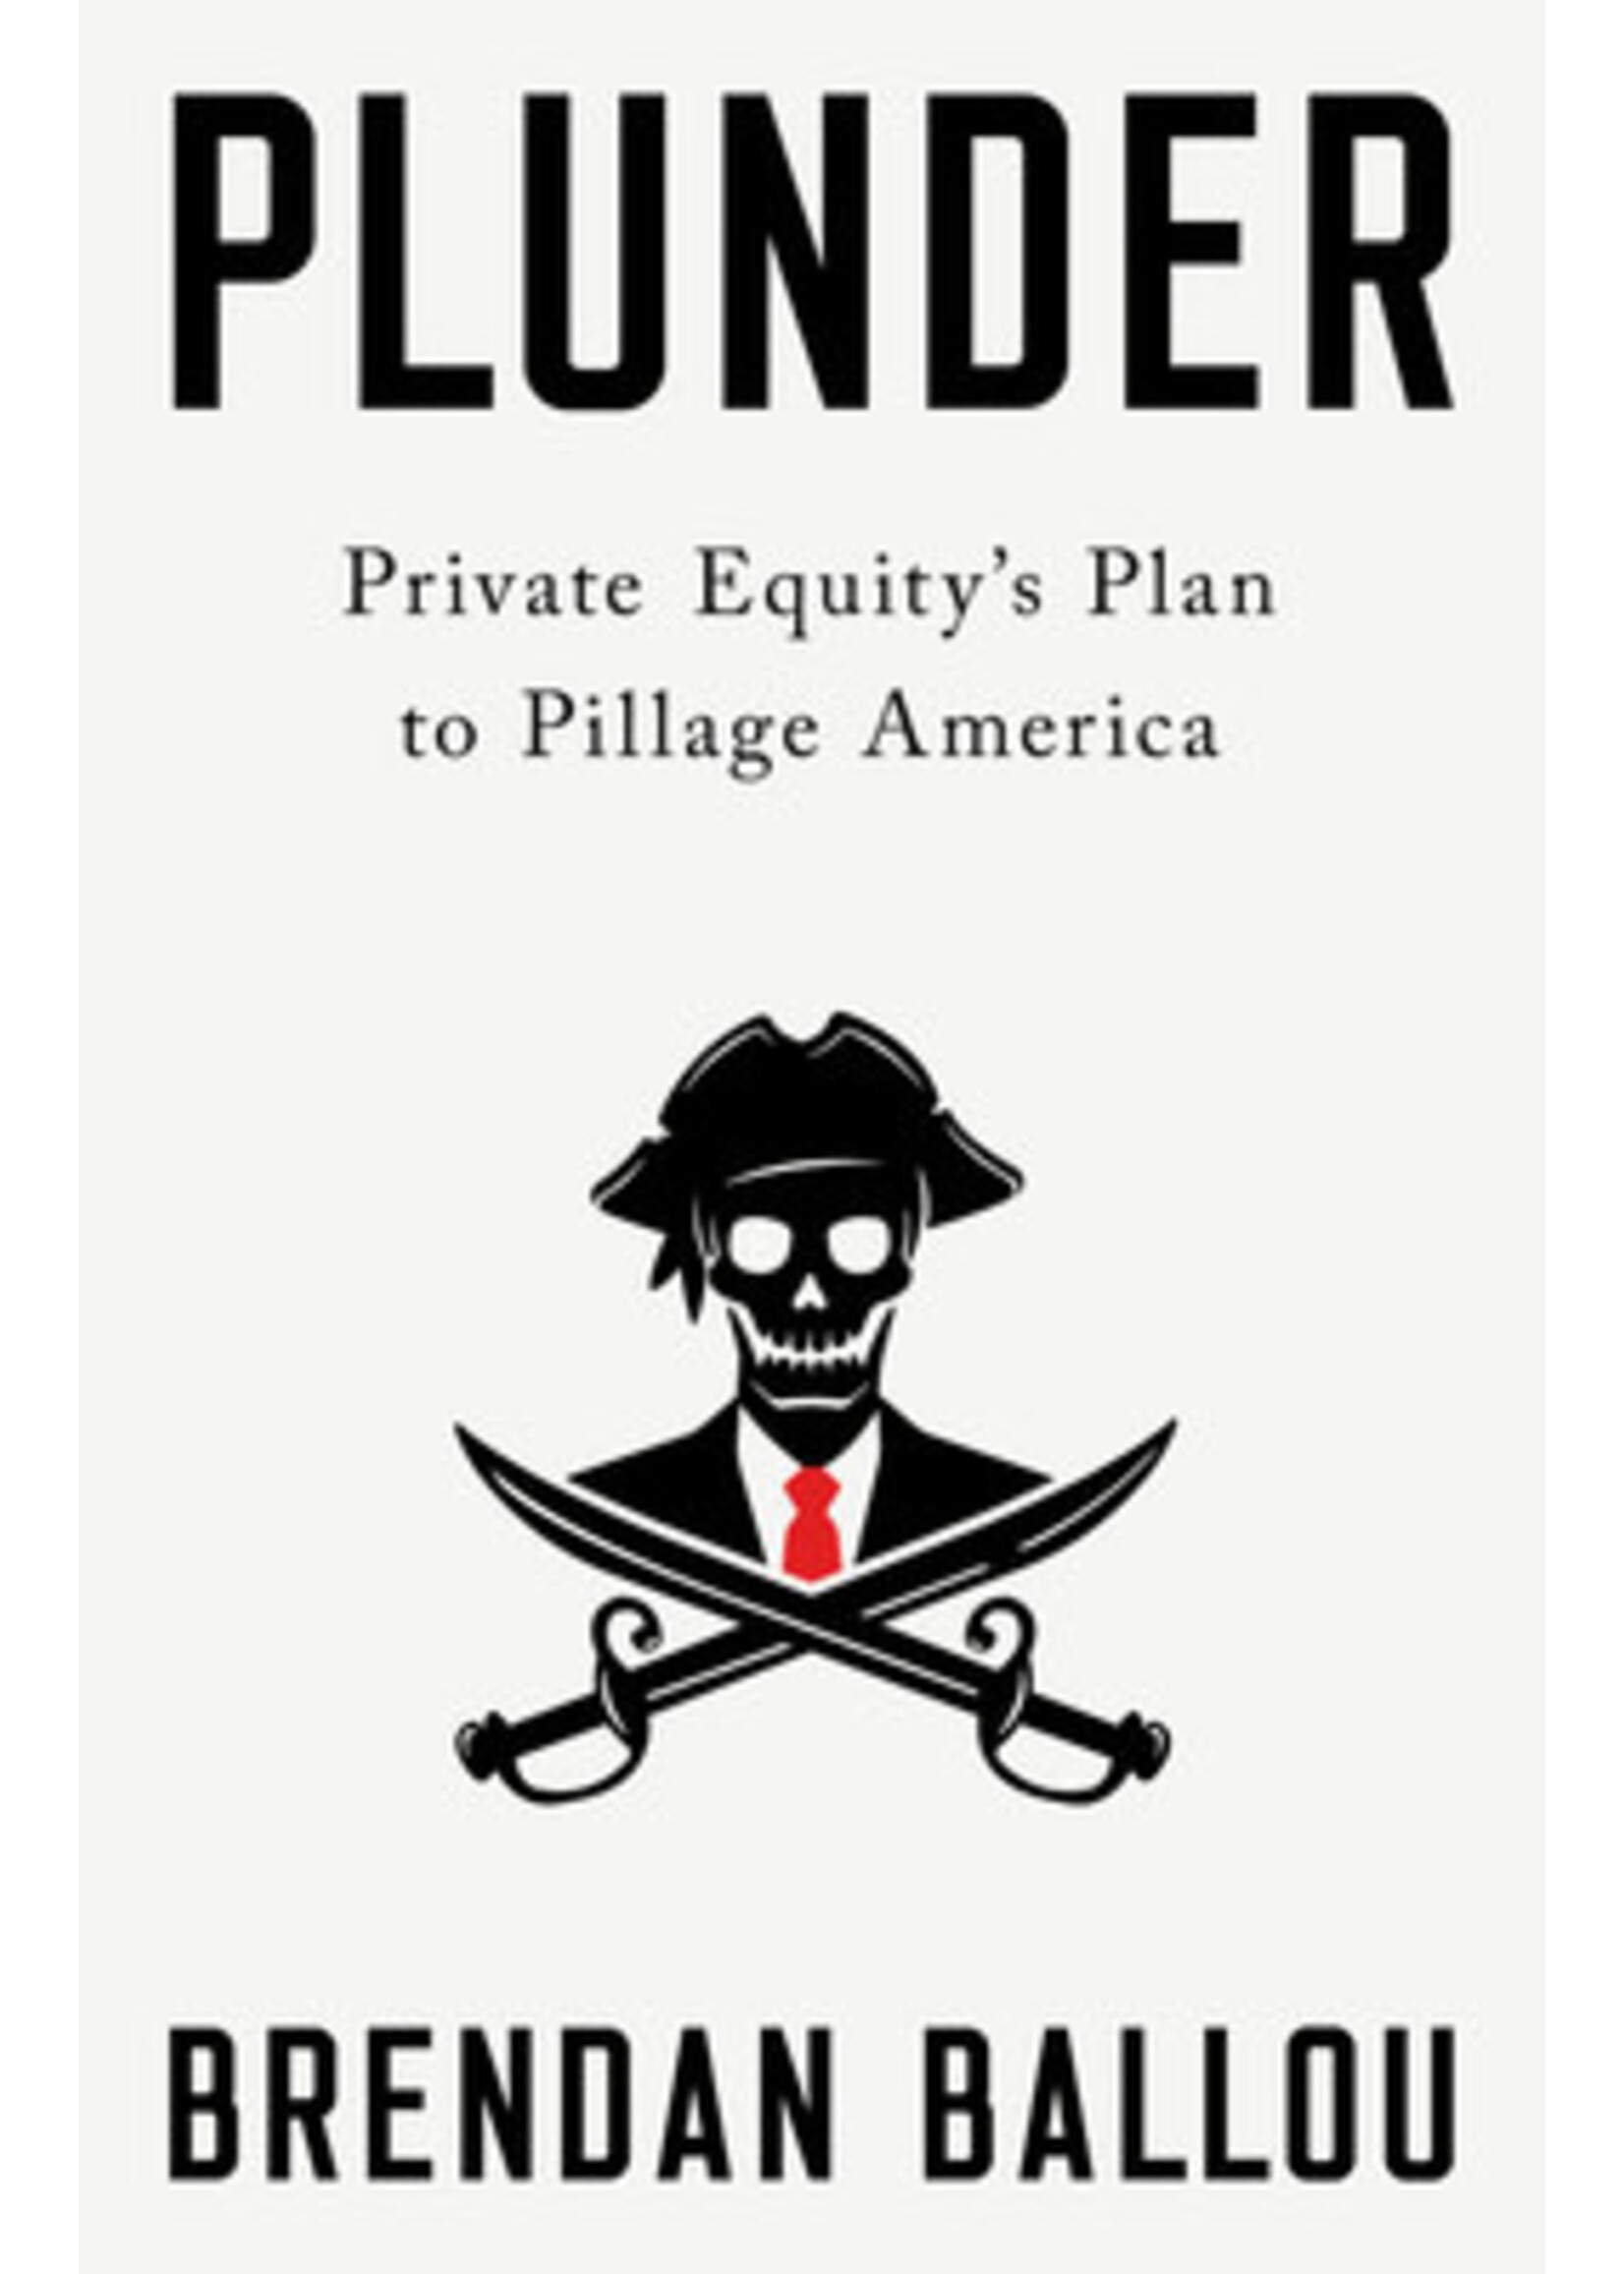 Plunder: Private Equity's Plan to Pillage America by Brendan Ballou